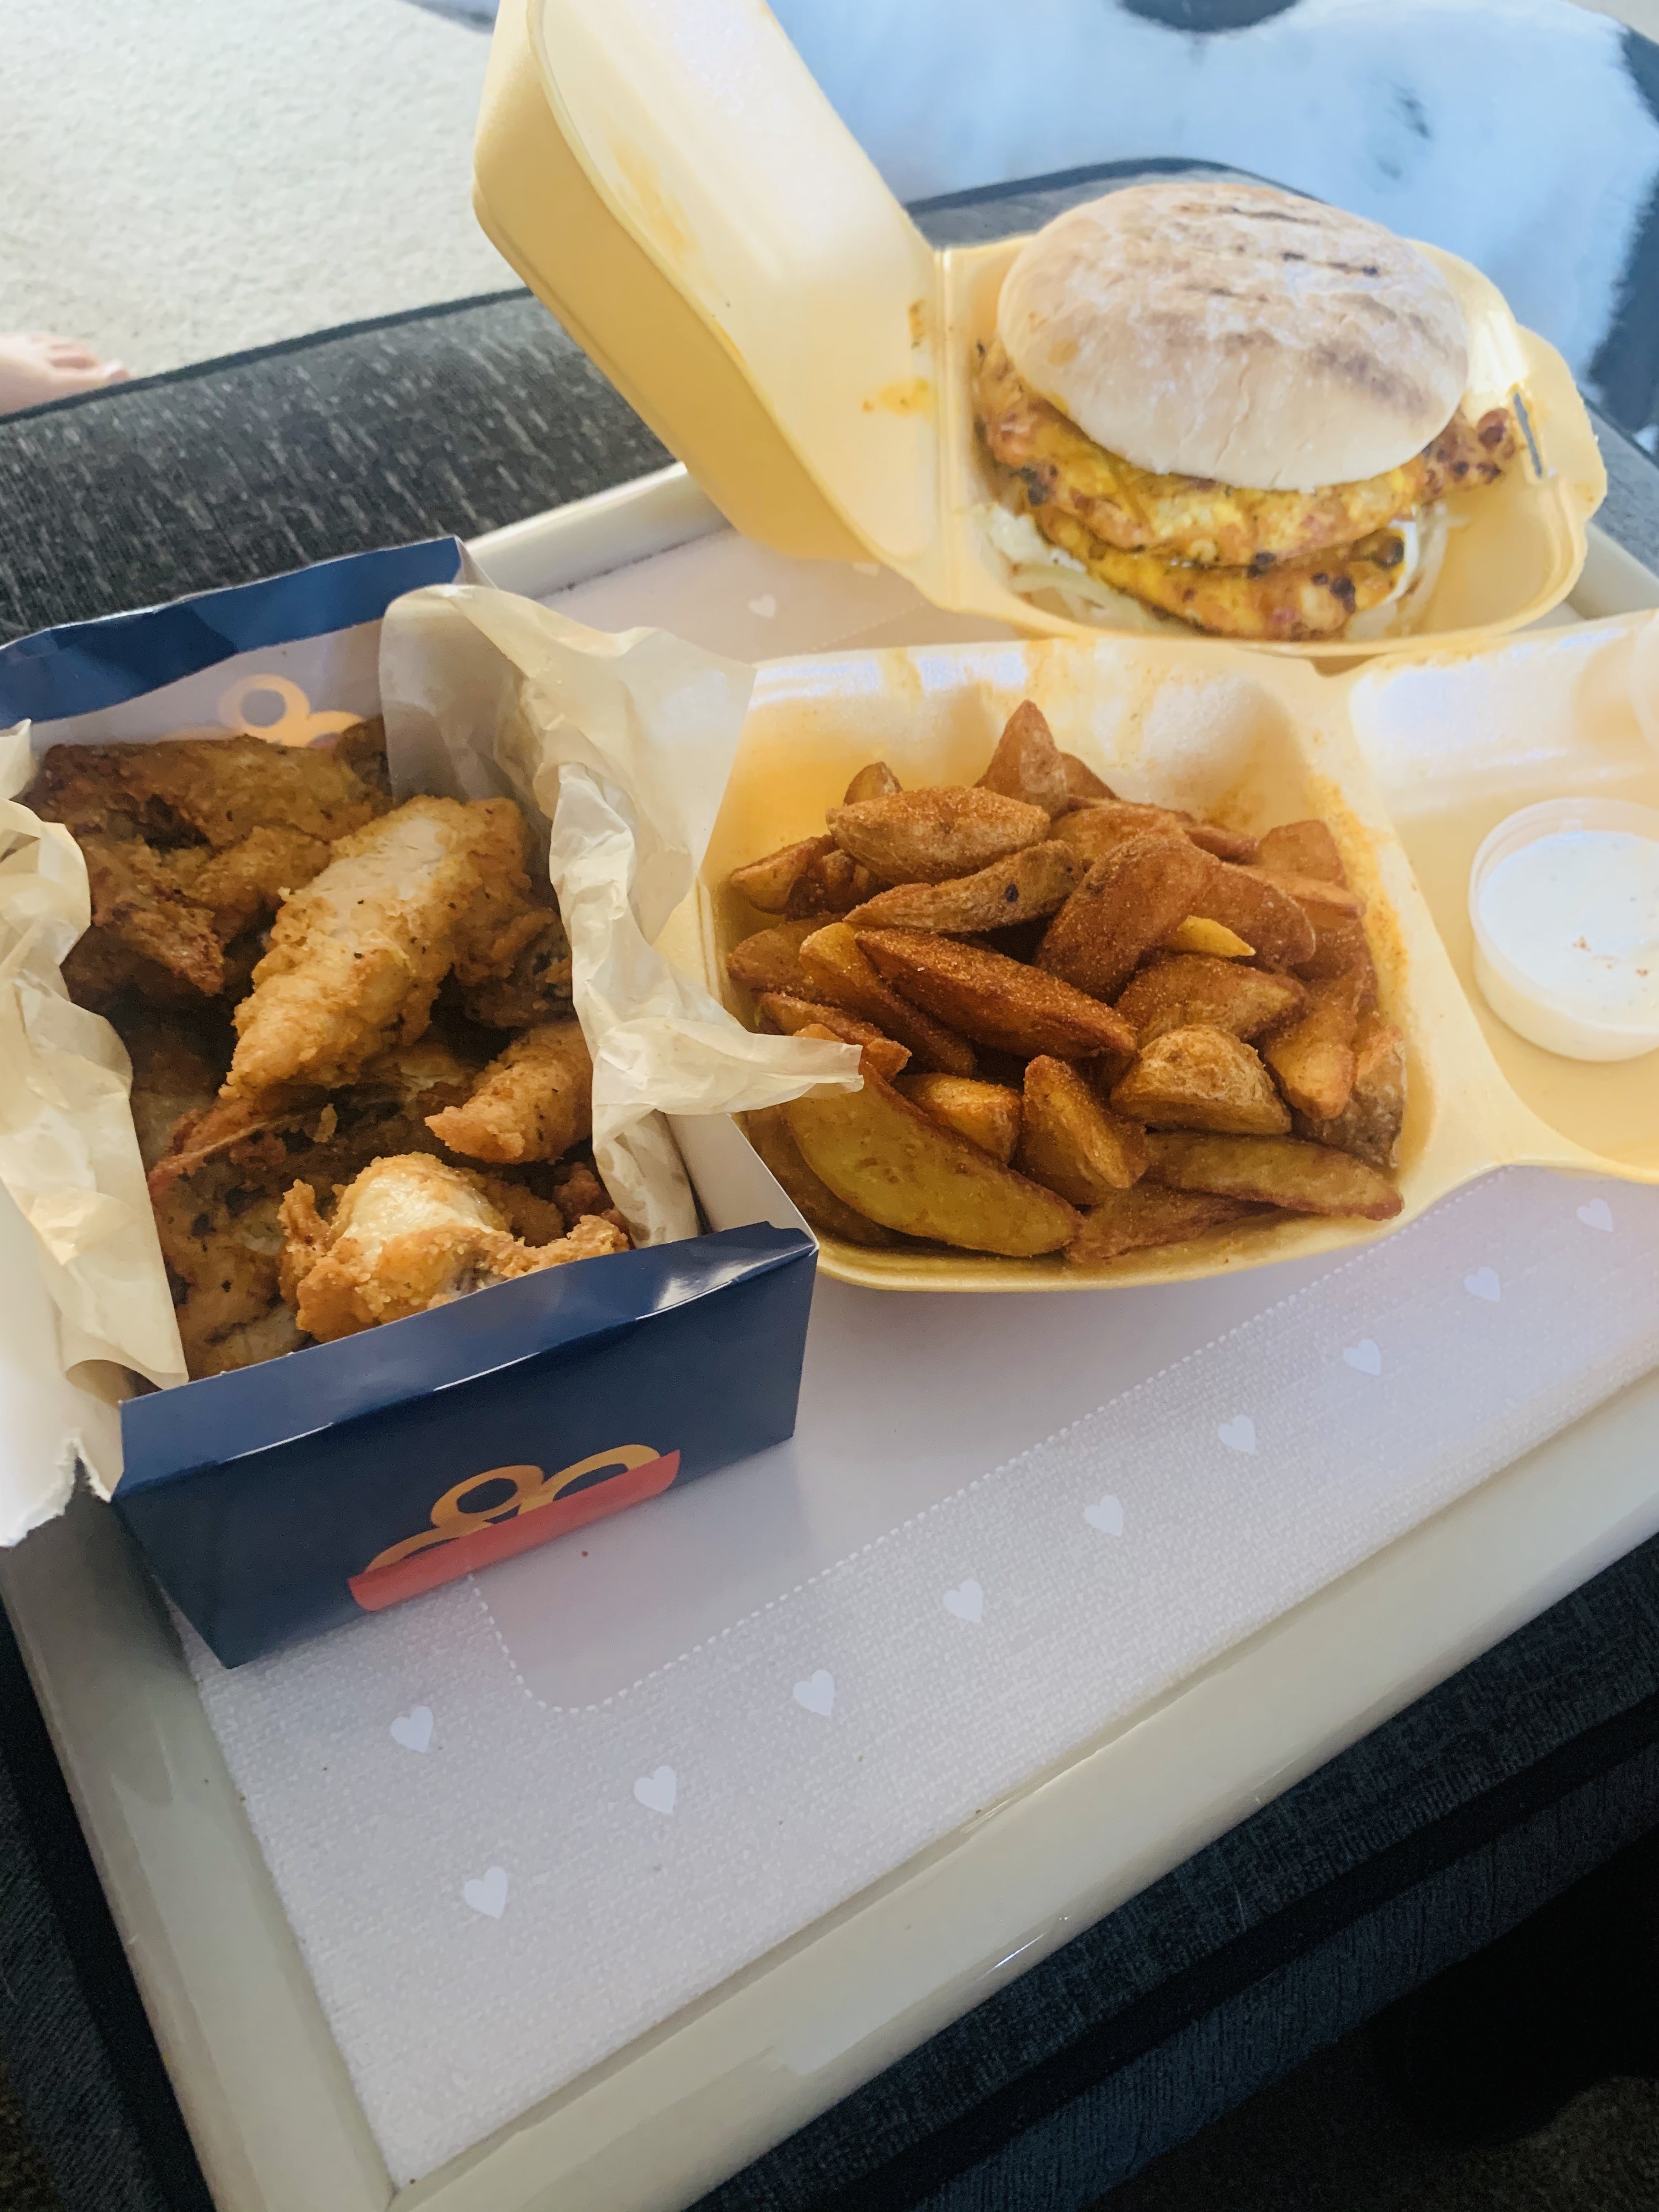 Dirty Takeaway Pictures Volume 3 - Page 460 - Food, Drink & Restaurants - PistonHeads